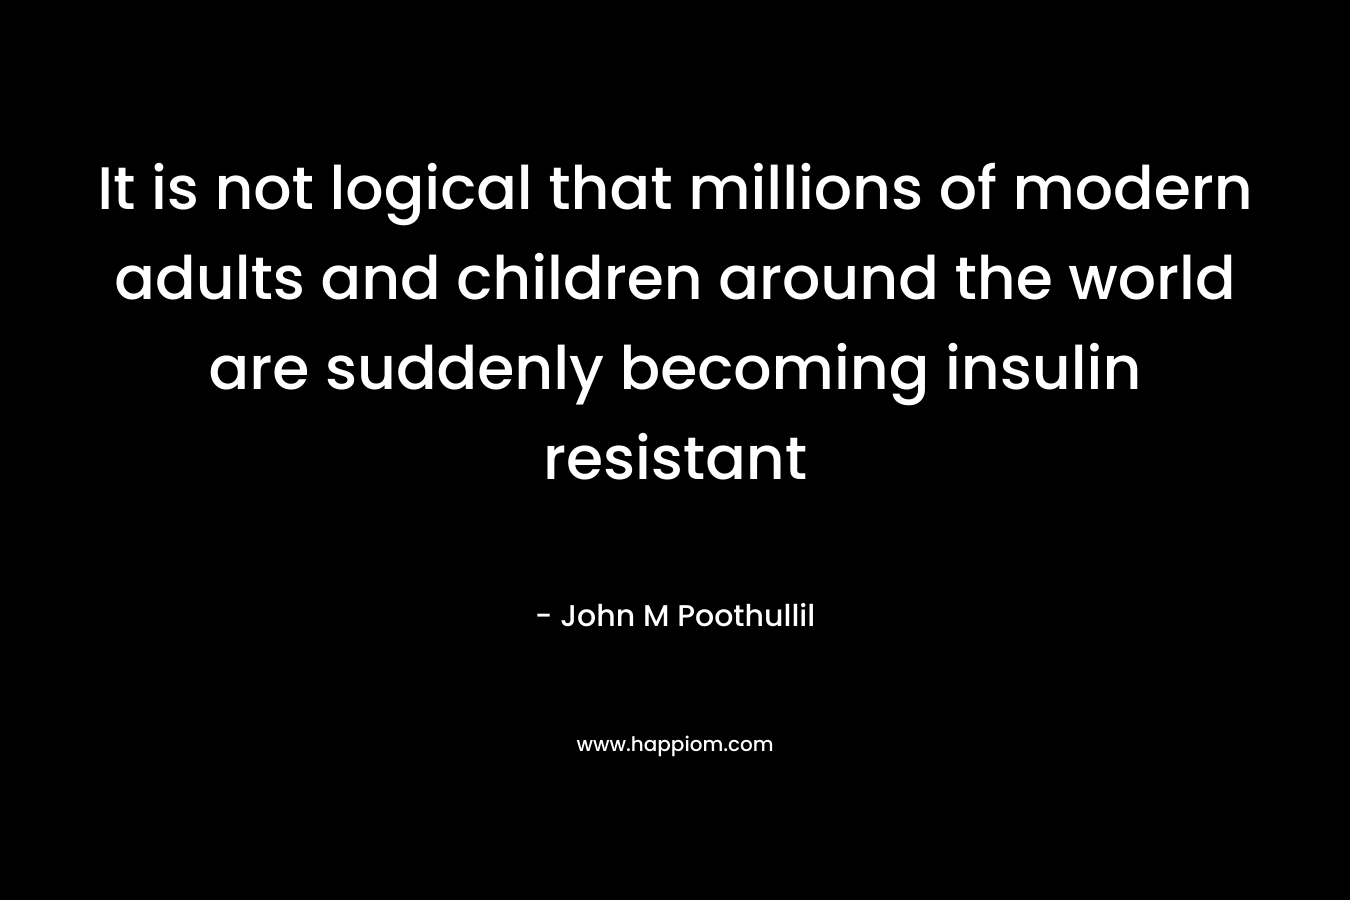 It is not logical that millions of modern adults and children around the world are suddenly becoming insulin resistant – John M Poothullil